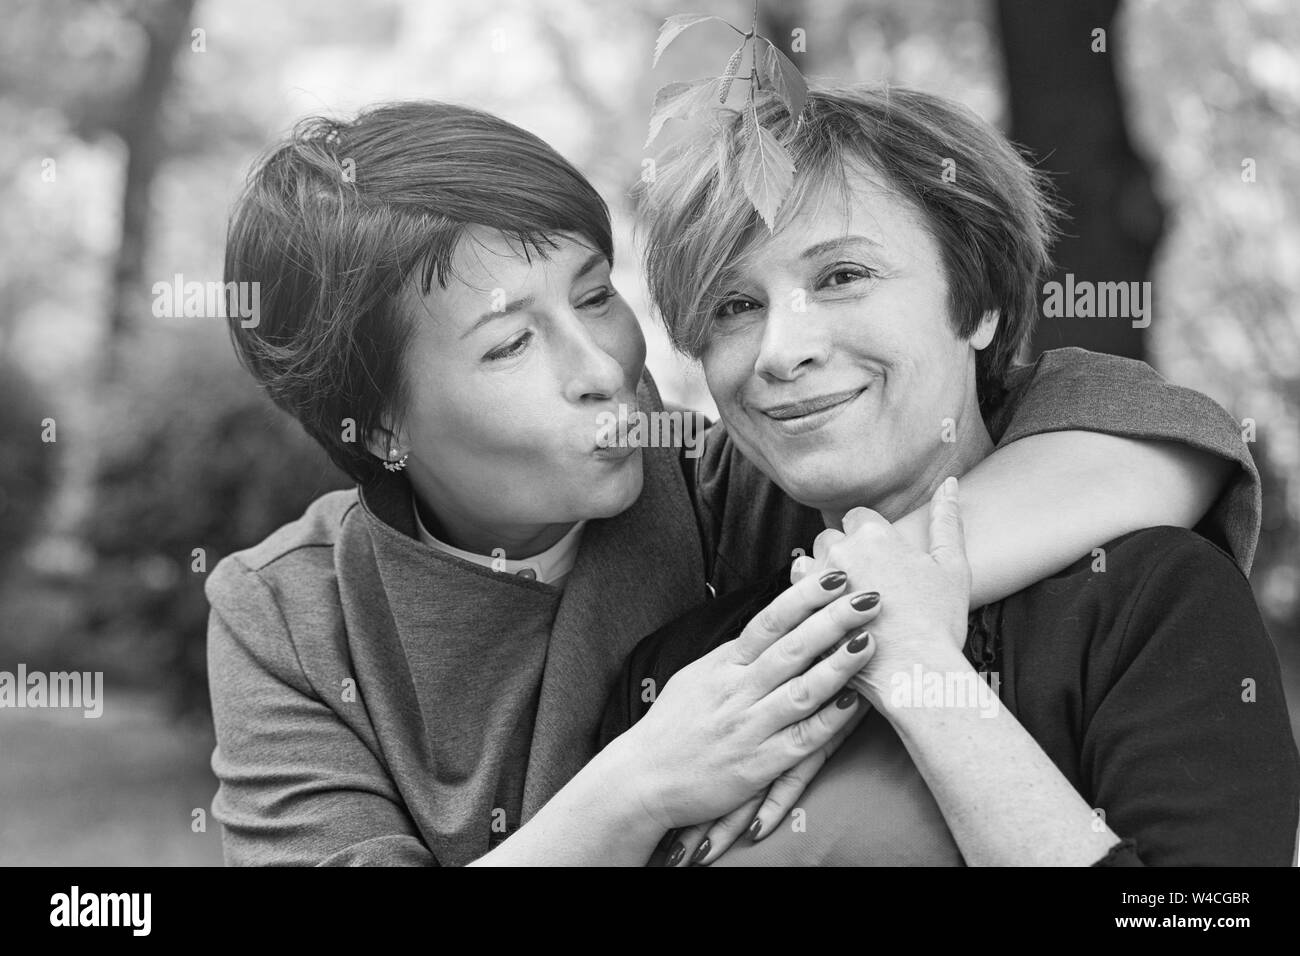 Happy older mother and mature daughter outdoor, black and white portrait Stock Photo